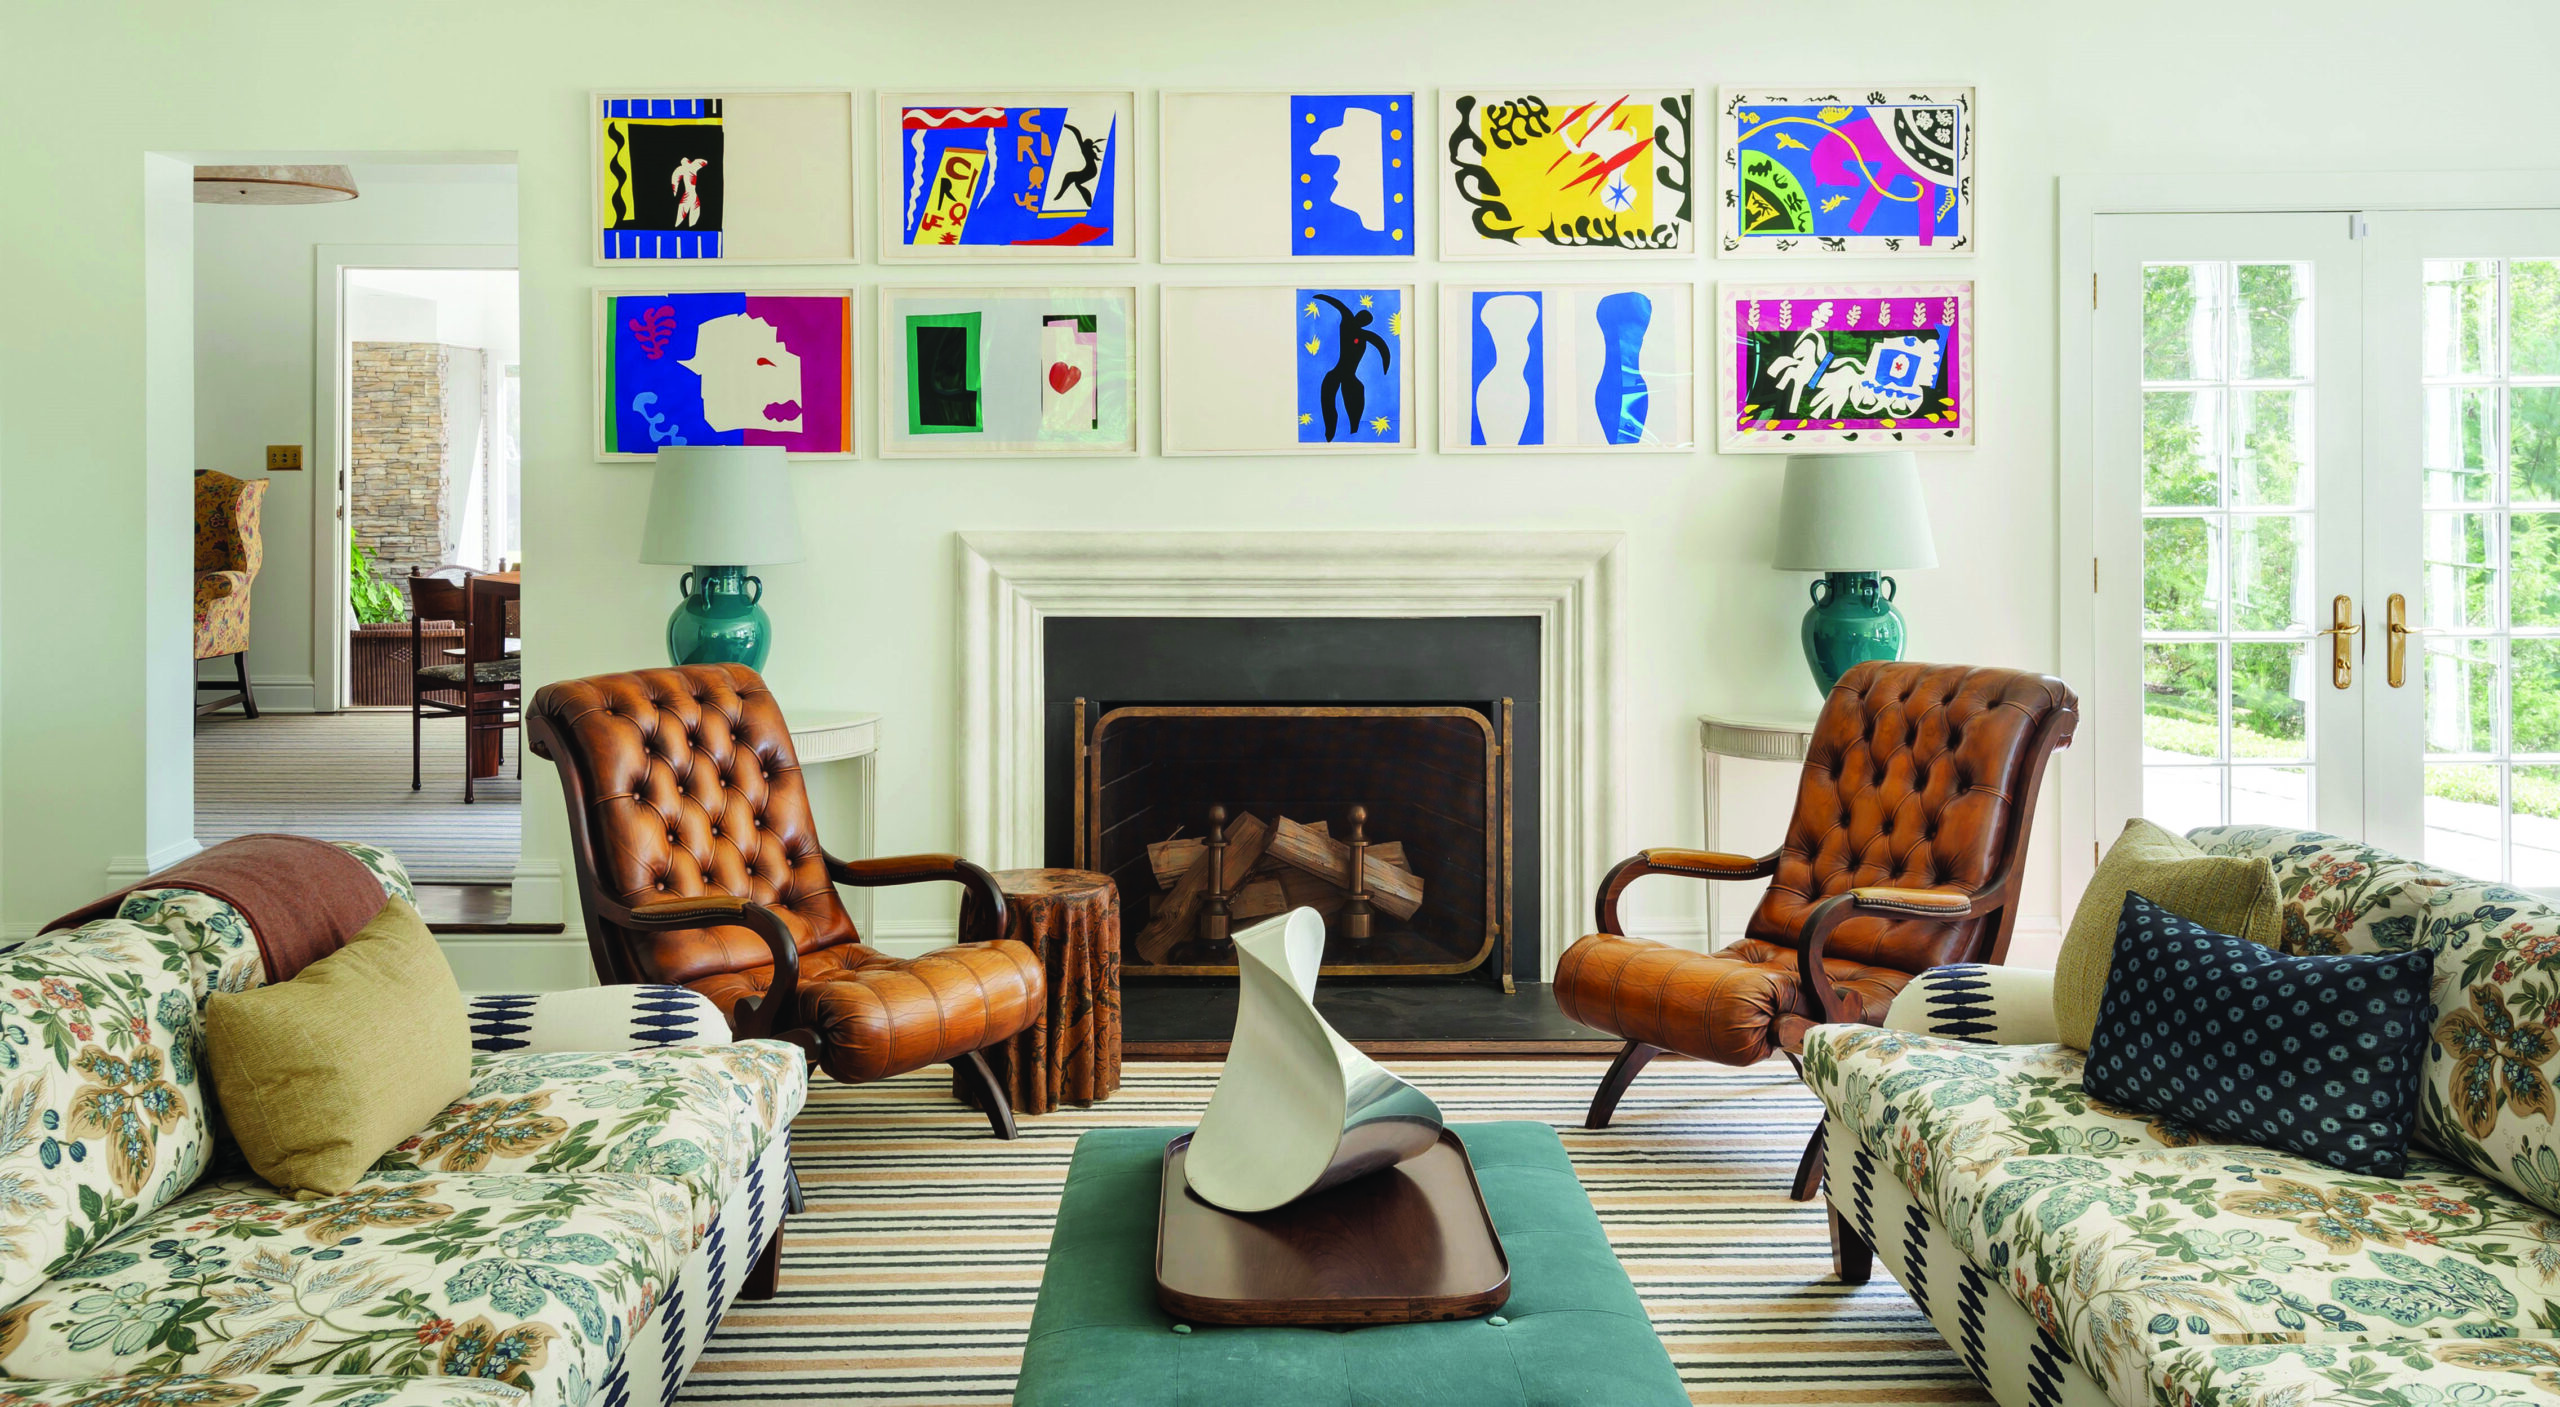 Huniford Design Studio complemented the bold coloring and patterns of Matisse's Jazz prints with the chairs’ rich brown leather upholstery and an unusual mix of striped and floral-printed fabrics. Photo: Matthew Williams 